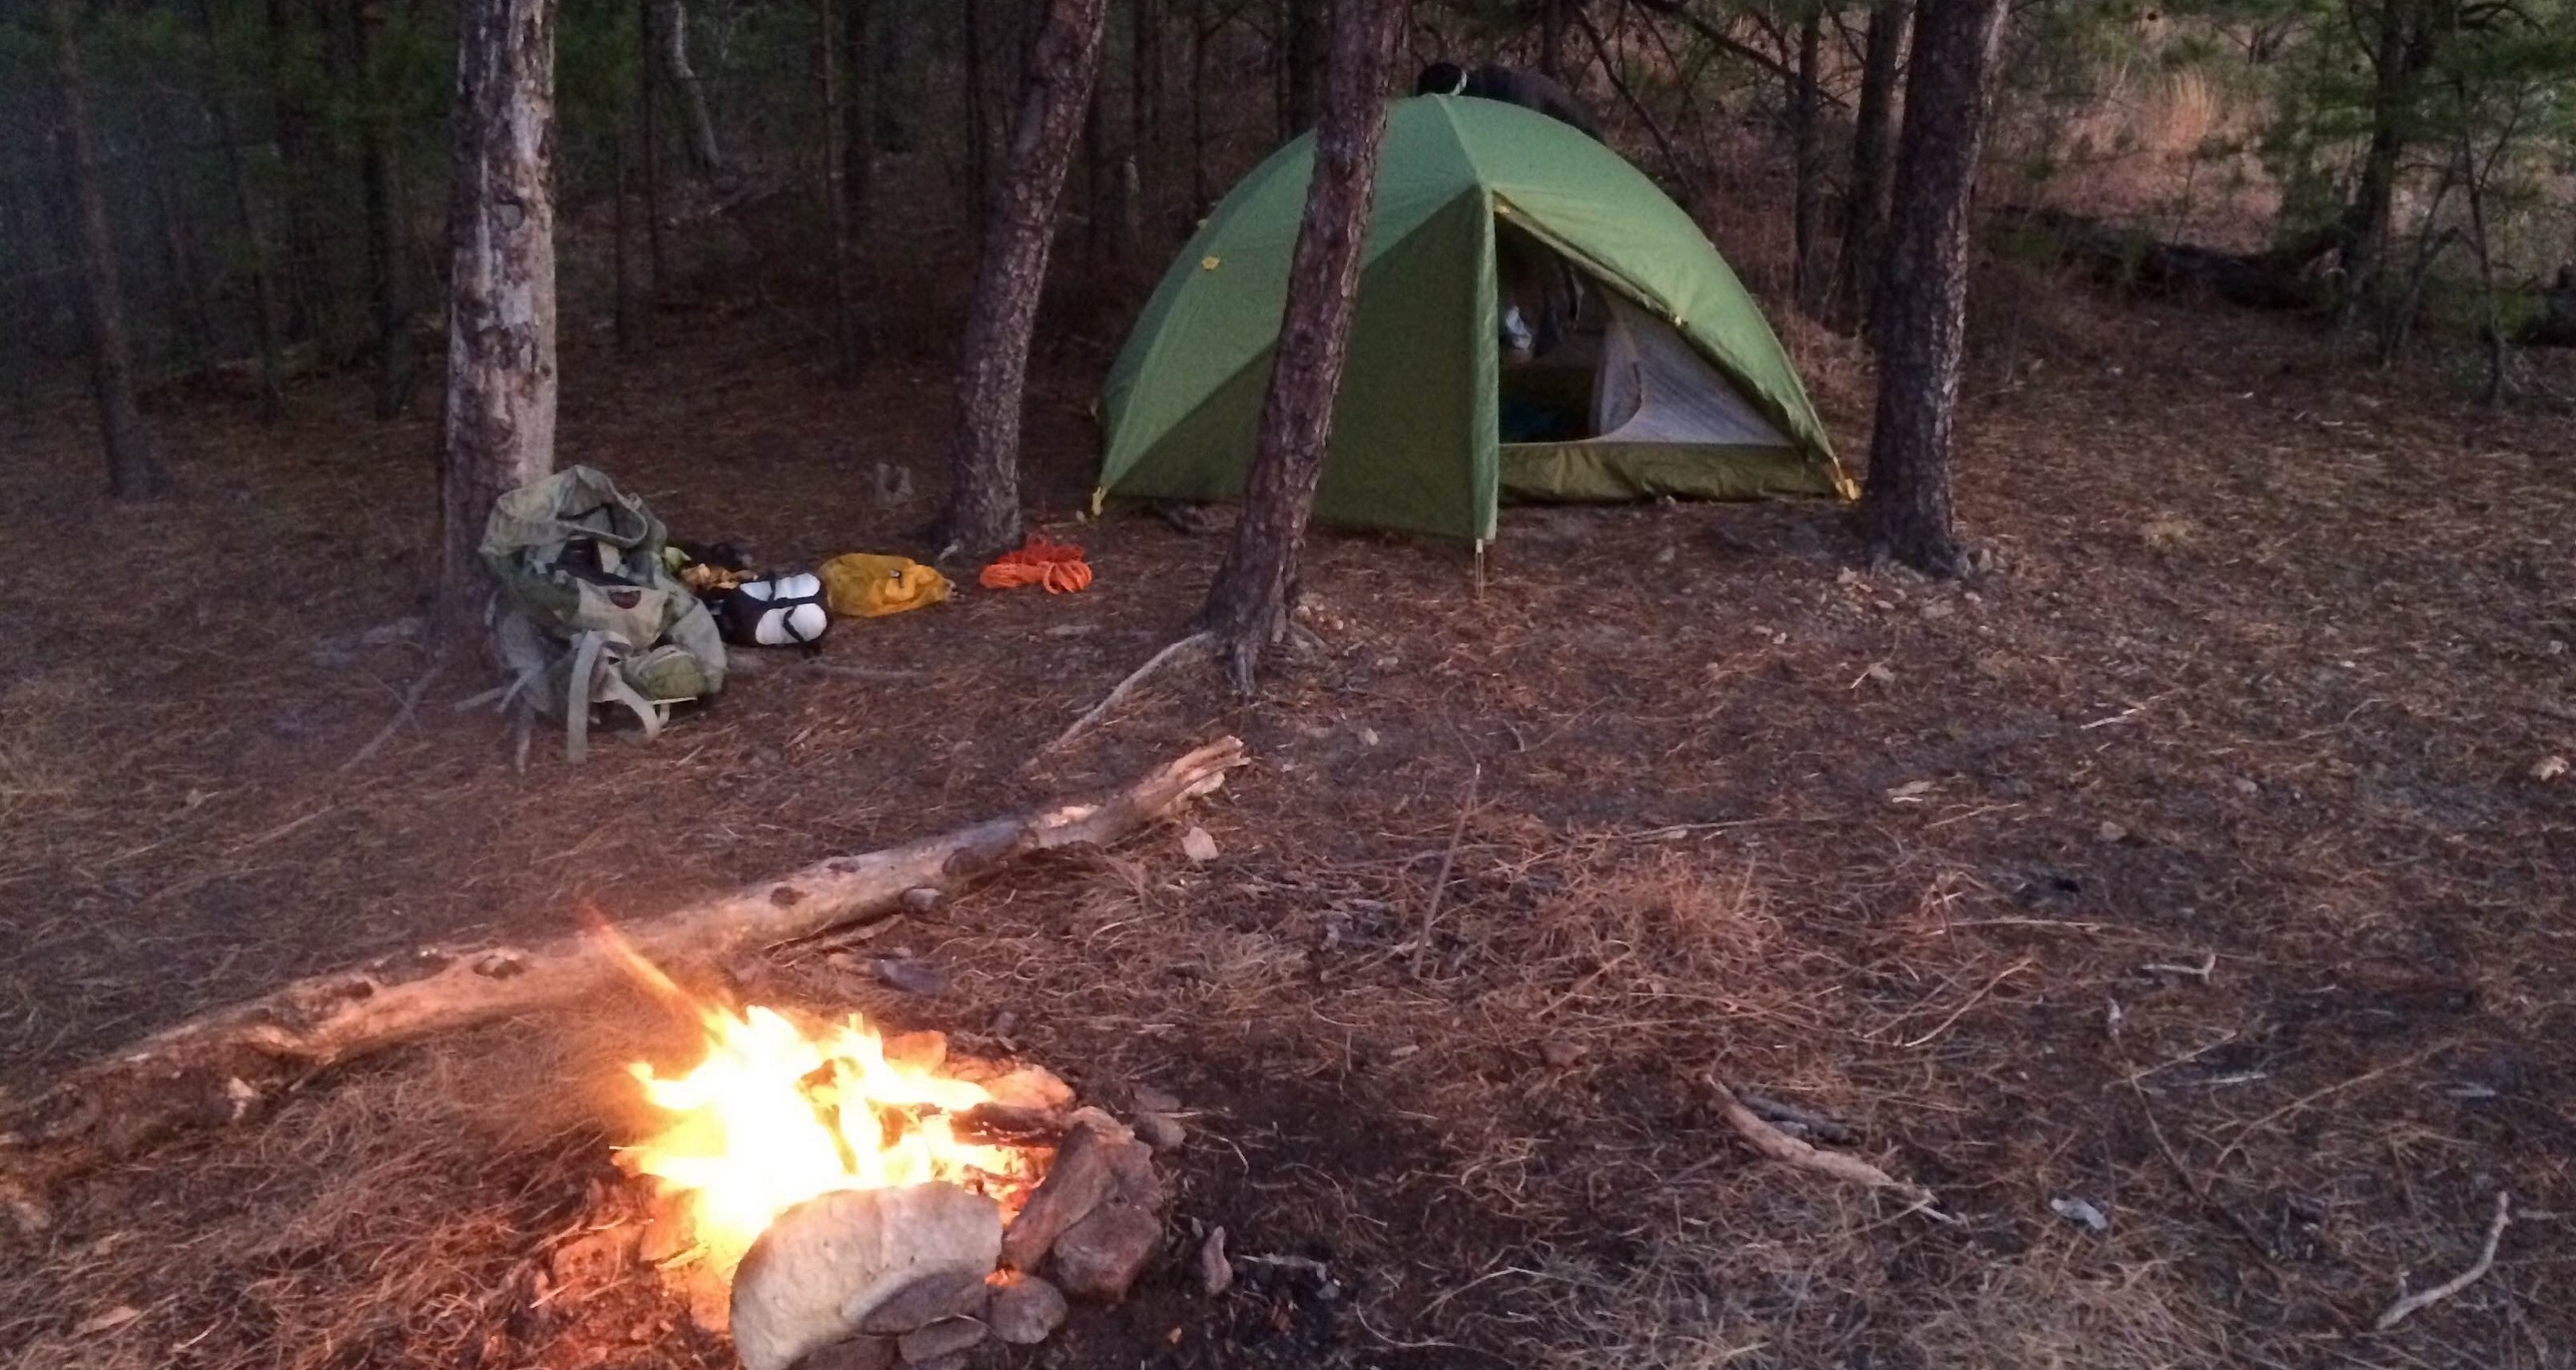 Camp Site at Red River Gorge